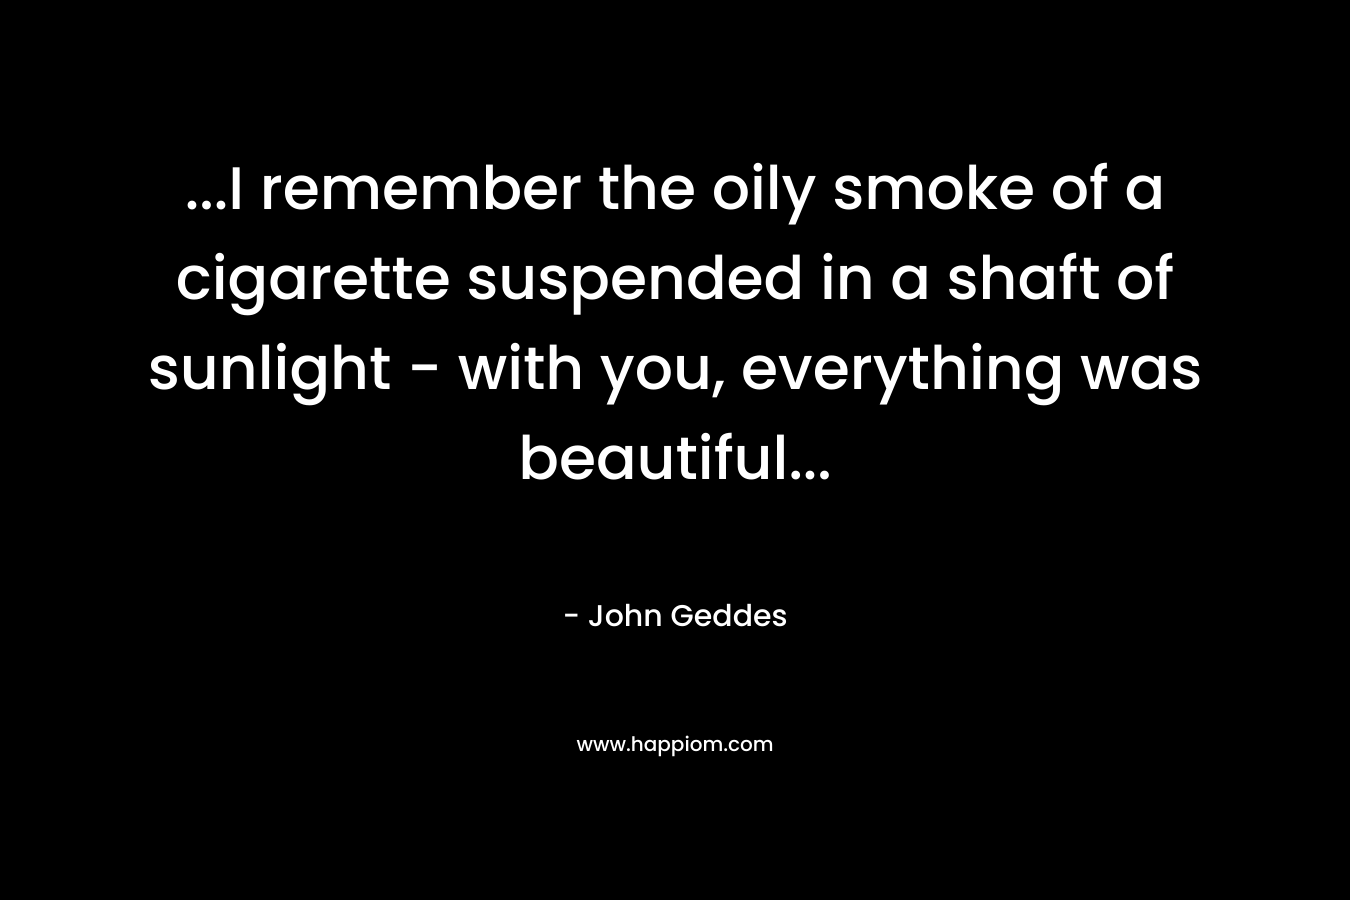 …I remember the oily smoke of a cigarette suspended in a shaft of sunlight – with you, everything was beautiful… – John Geddes